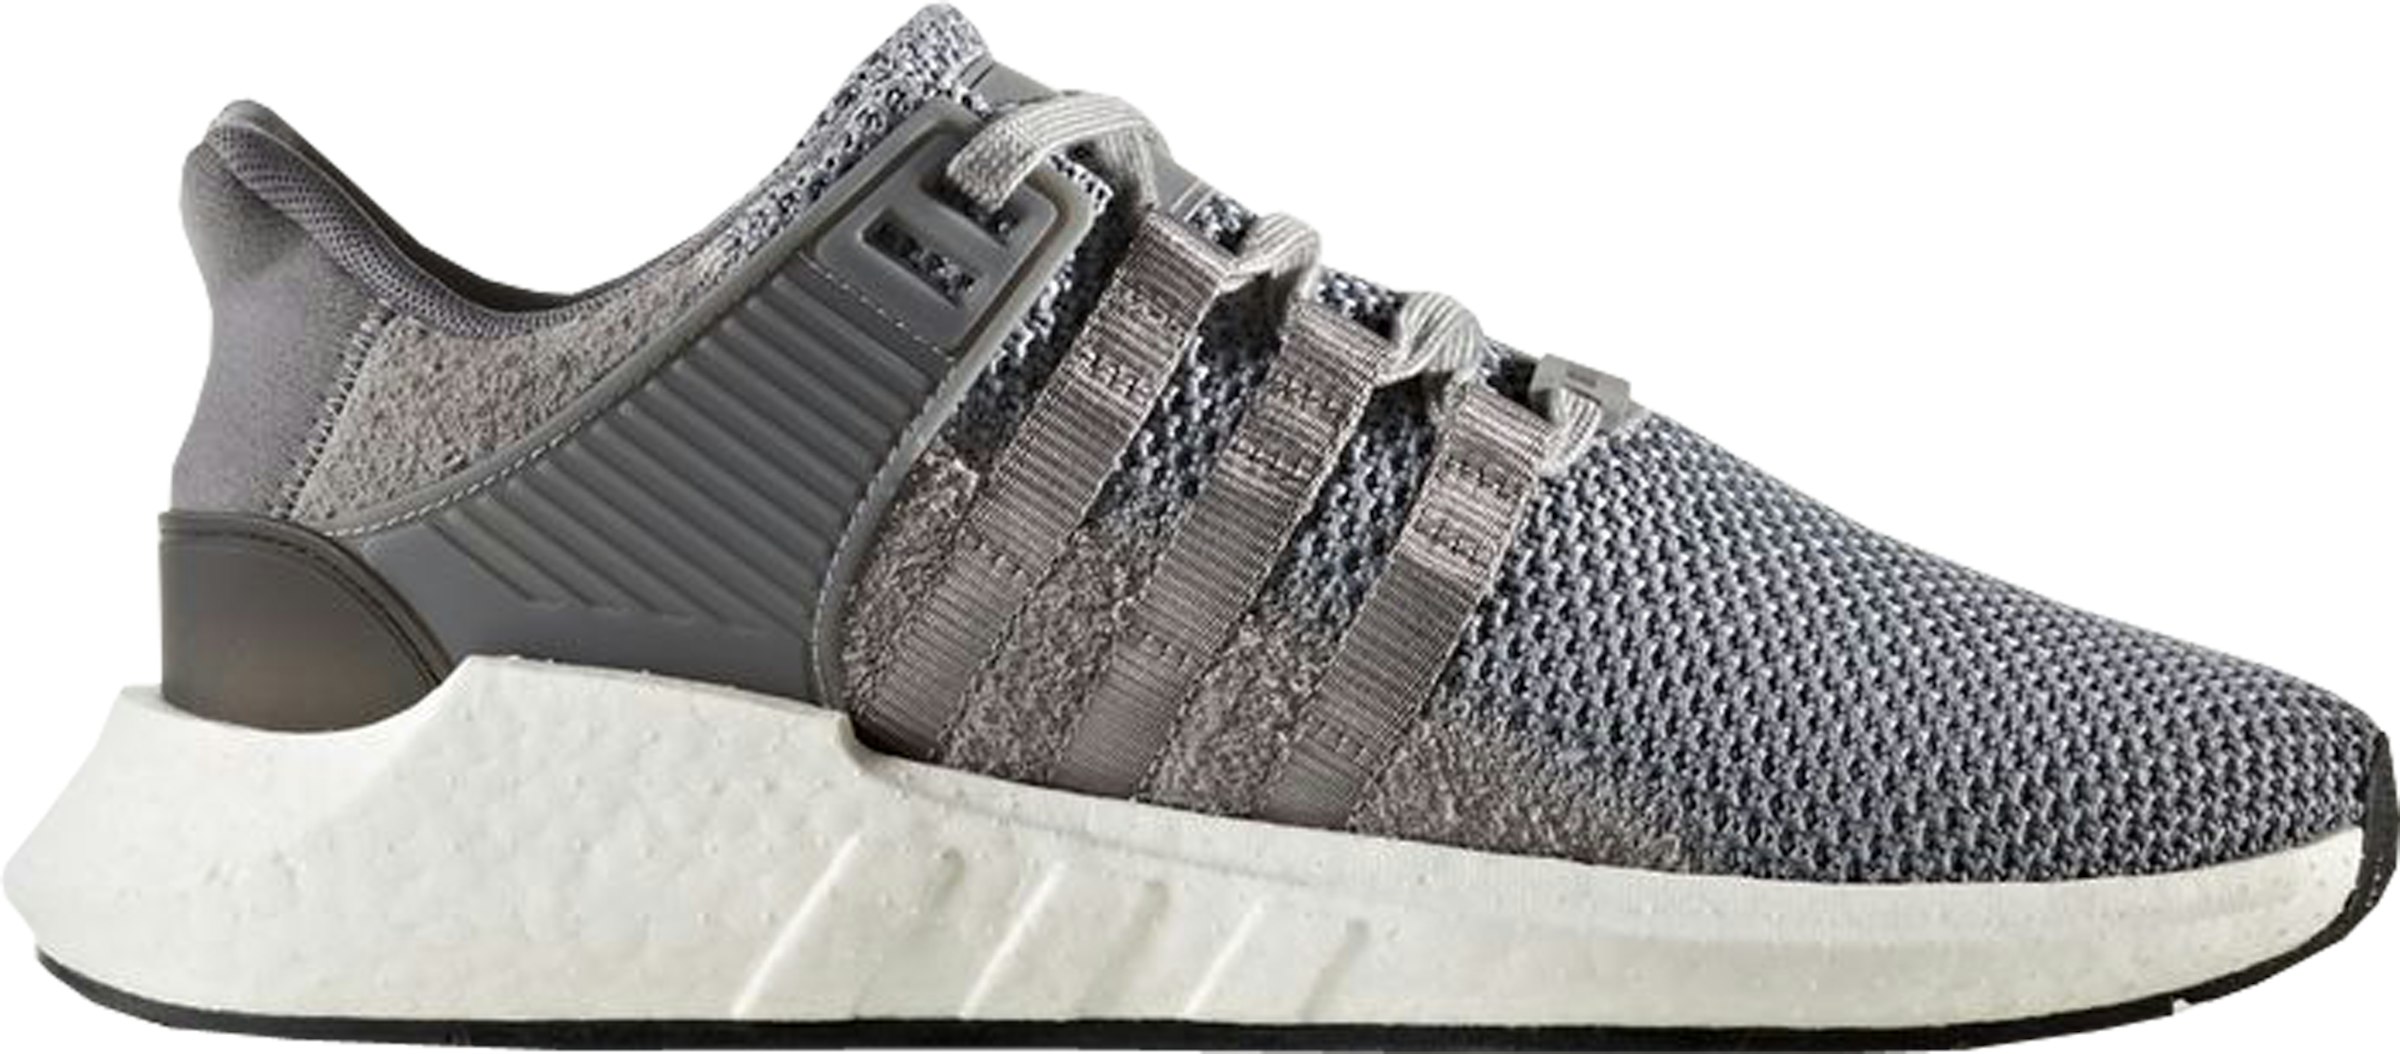 adidas EQT Support 93/17 Grey Heather Men's BY9511 - US